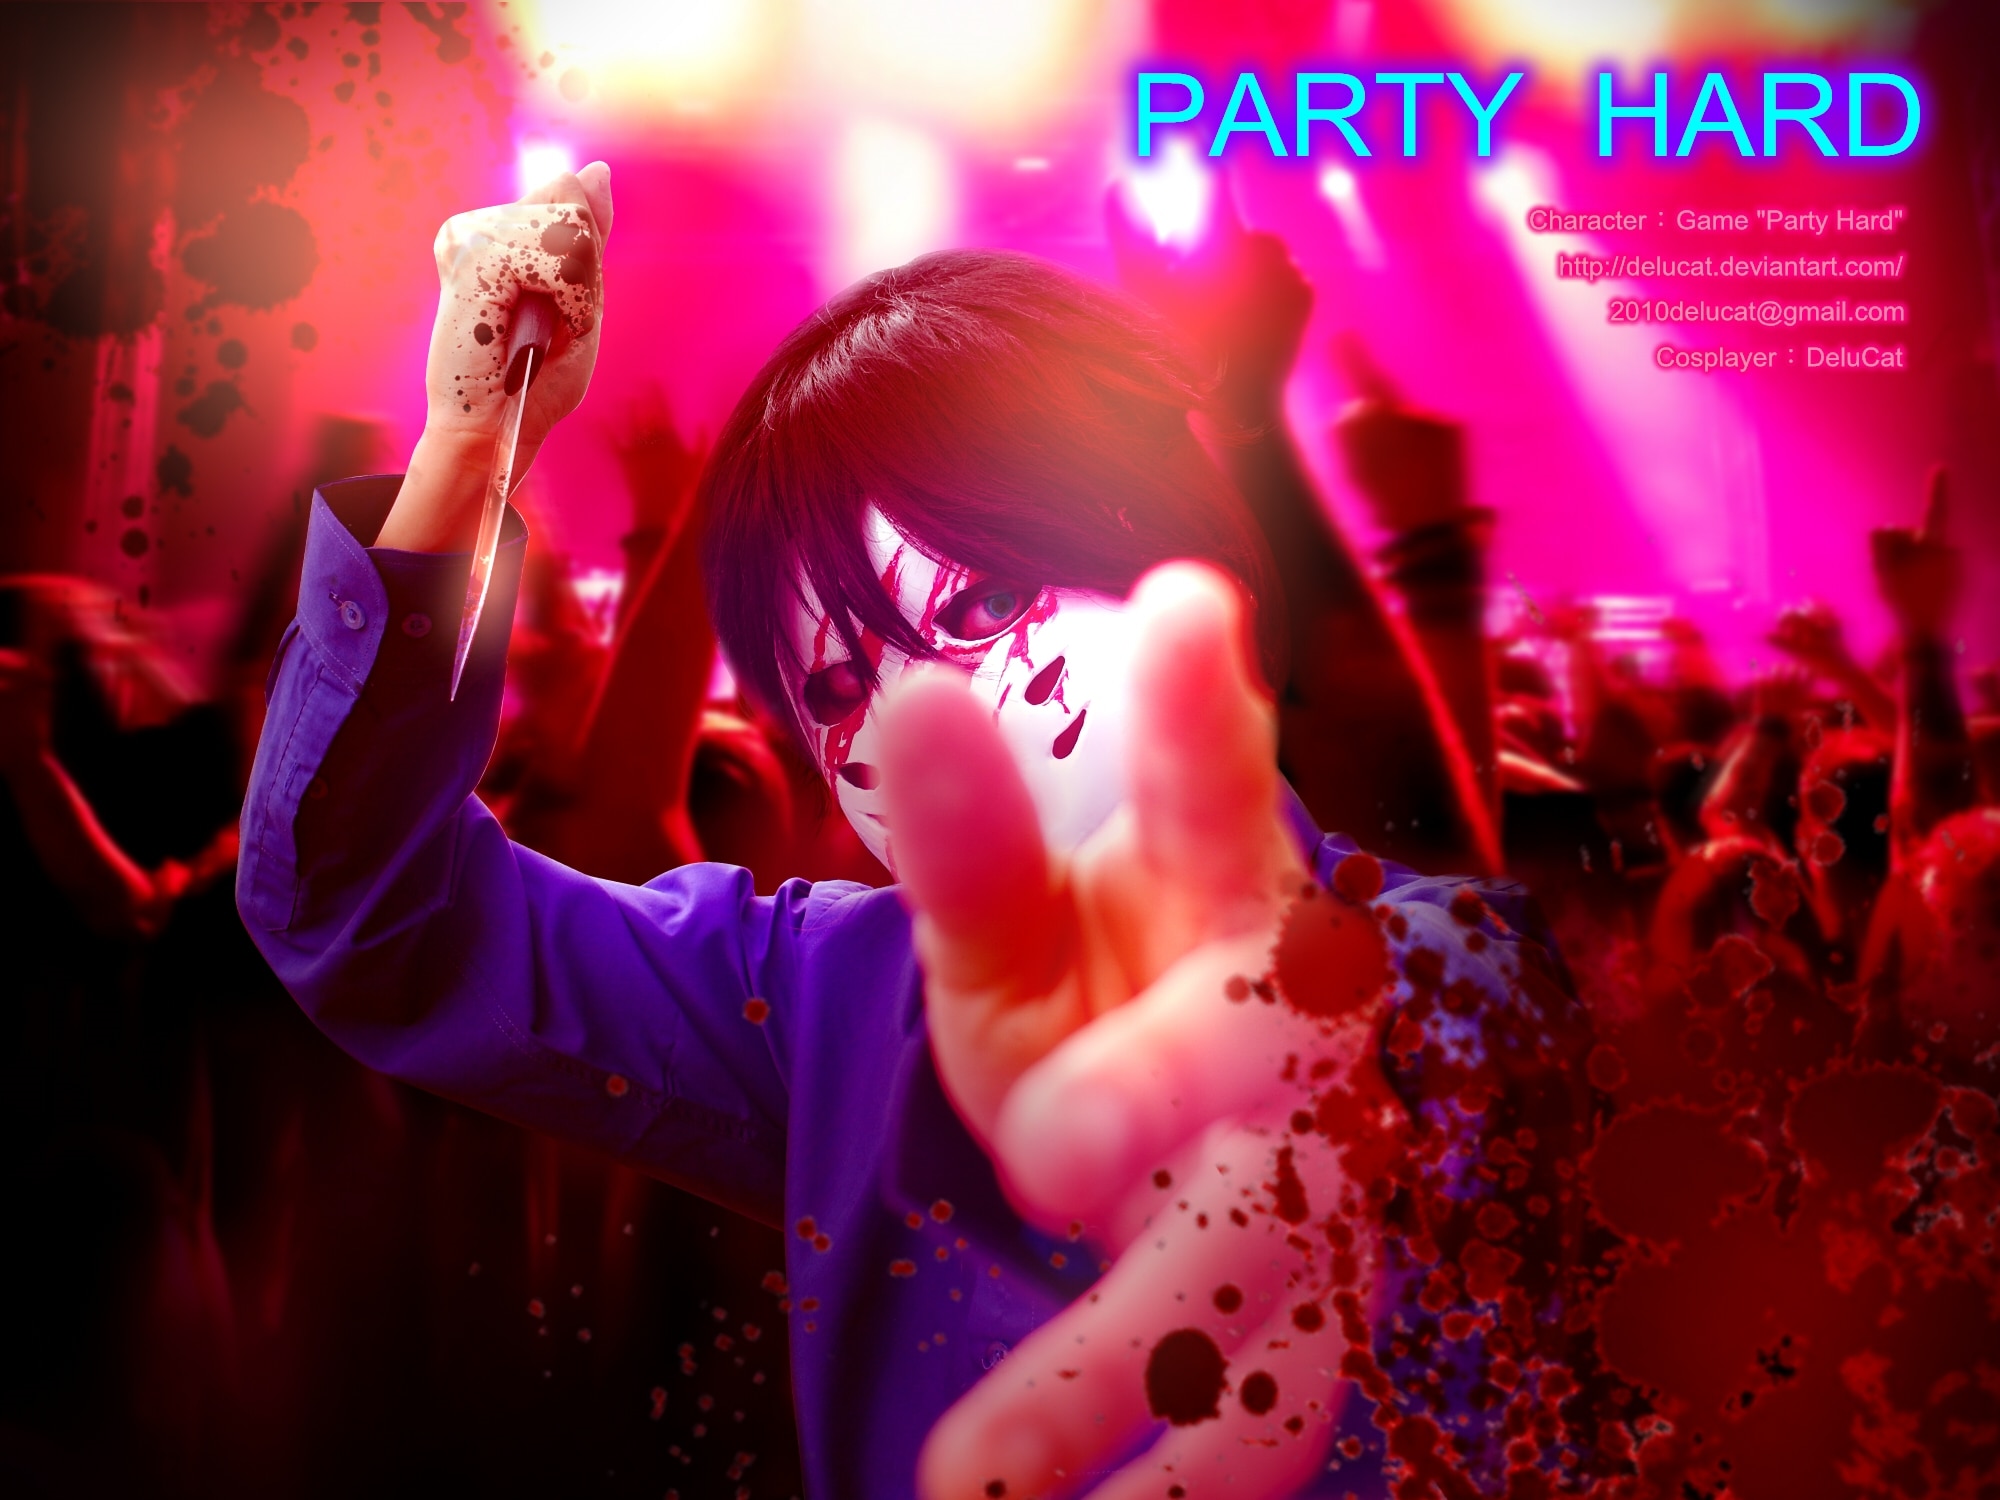 Party hard me. Пати киллер Дариус. Дариус пати Хард 2. Party hard косплей. Пати Хард арты.